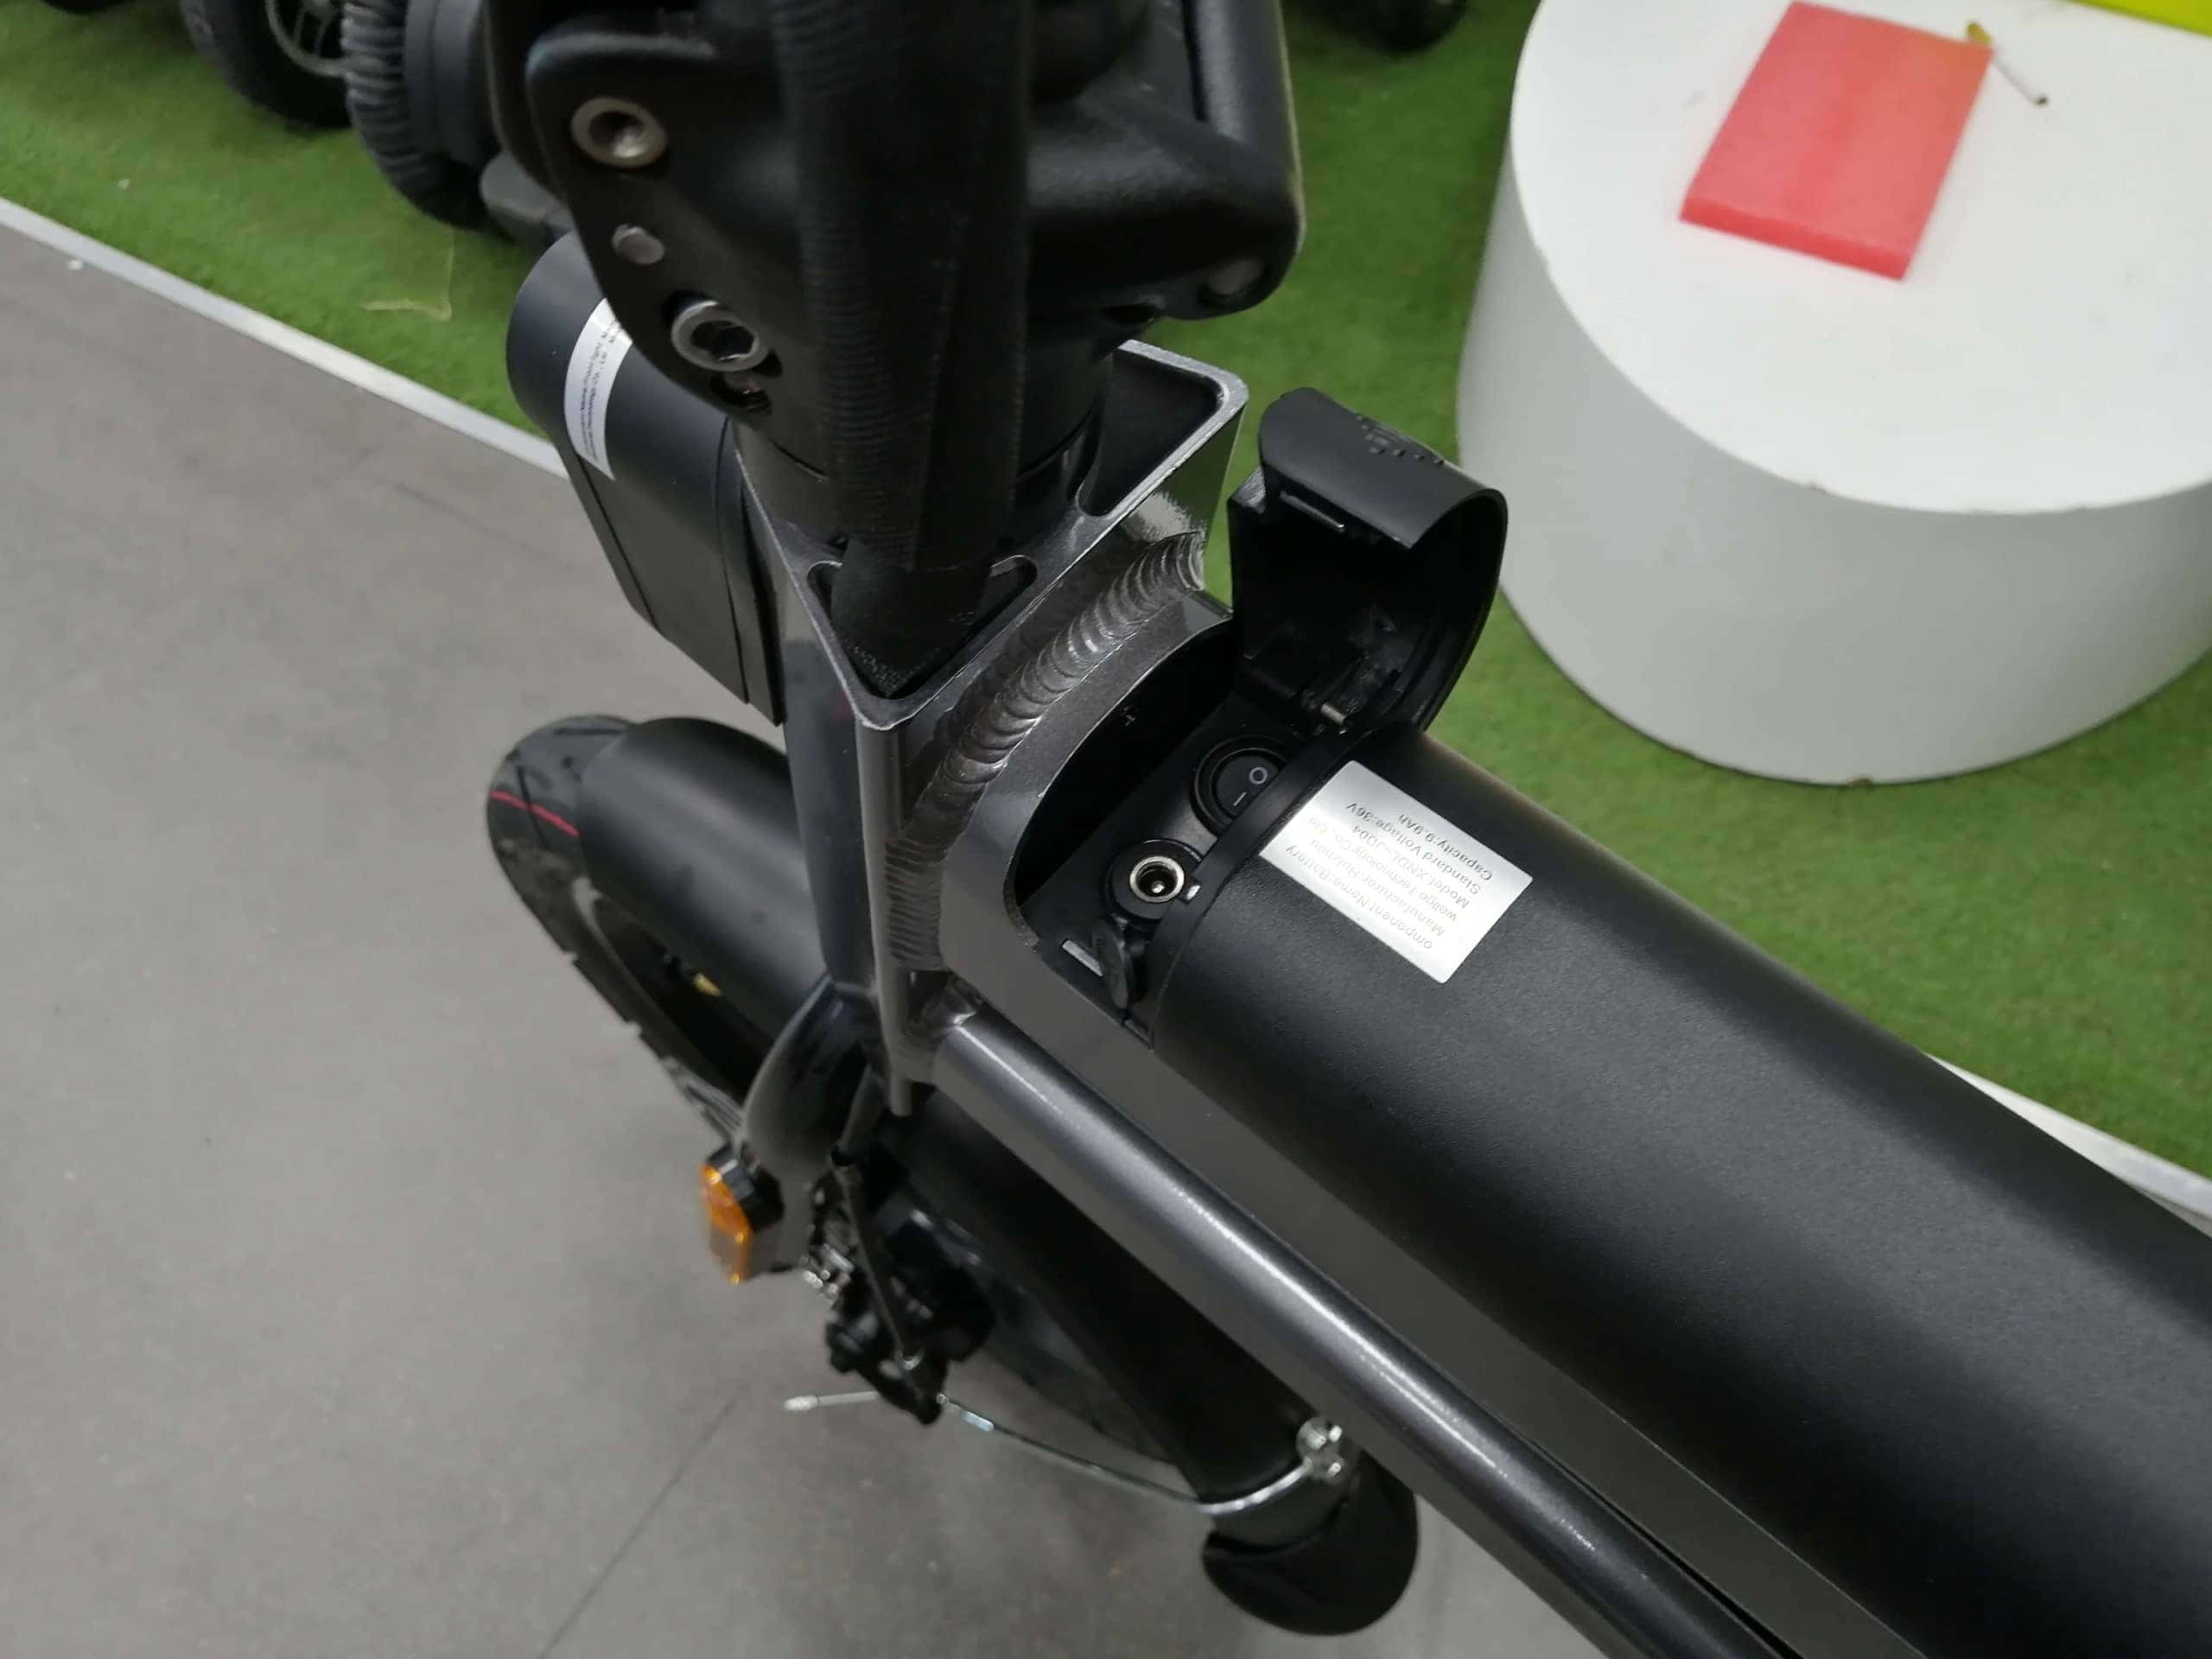 JI MOVE LC LTA approved ebike charging port scaled - Review of JI-MOVE LC, the most compact LTA approved ebike?